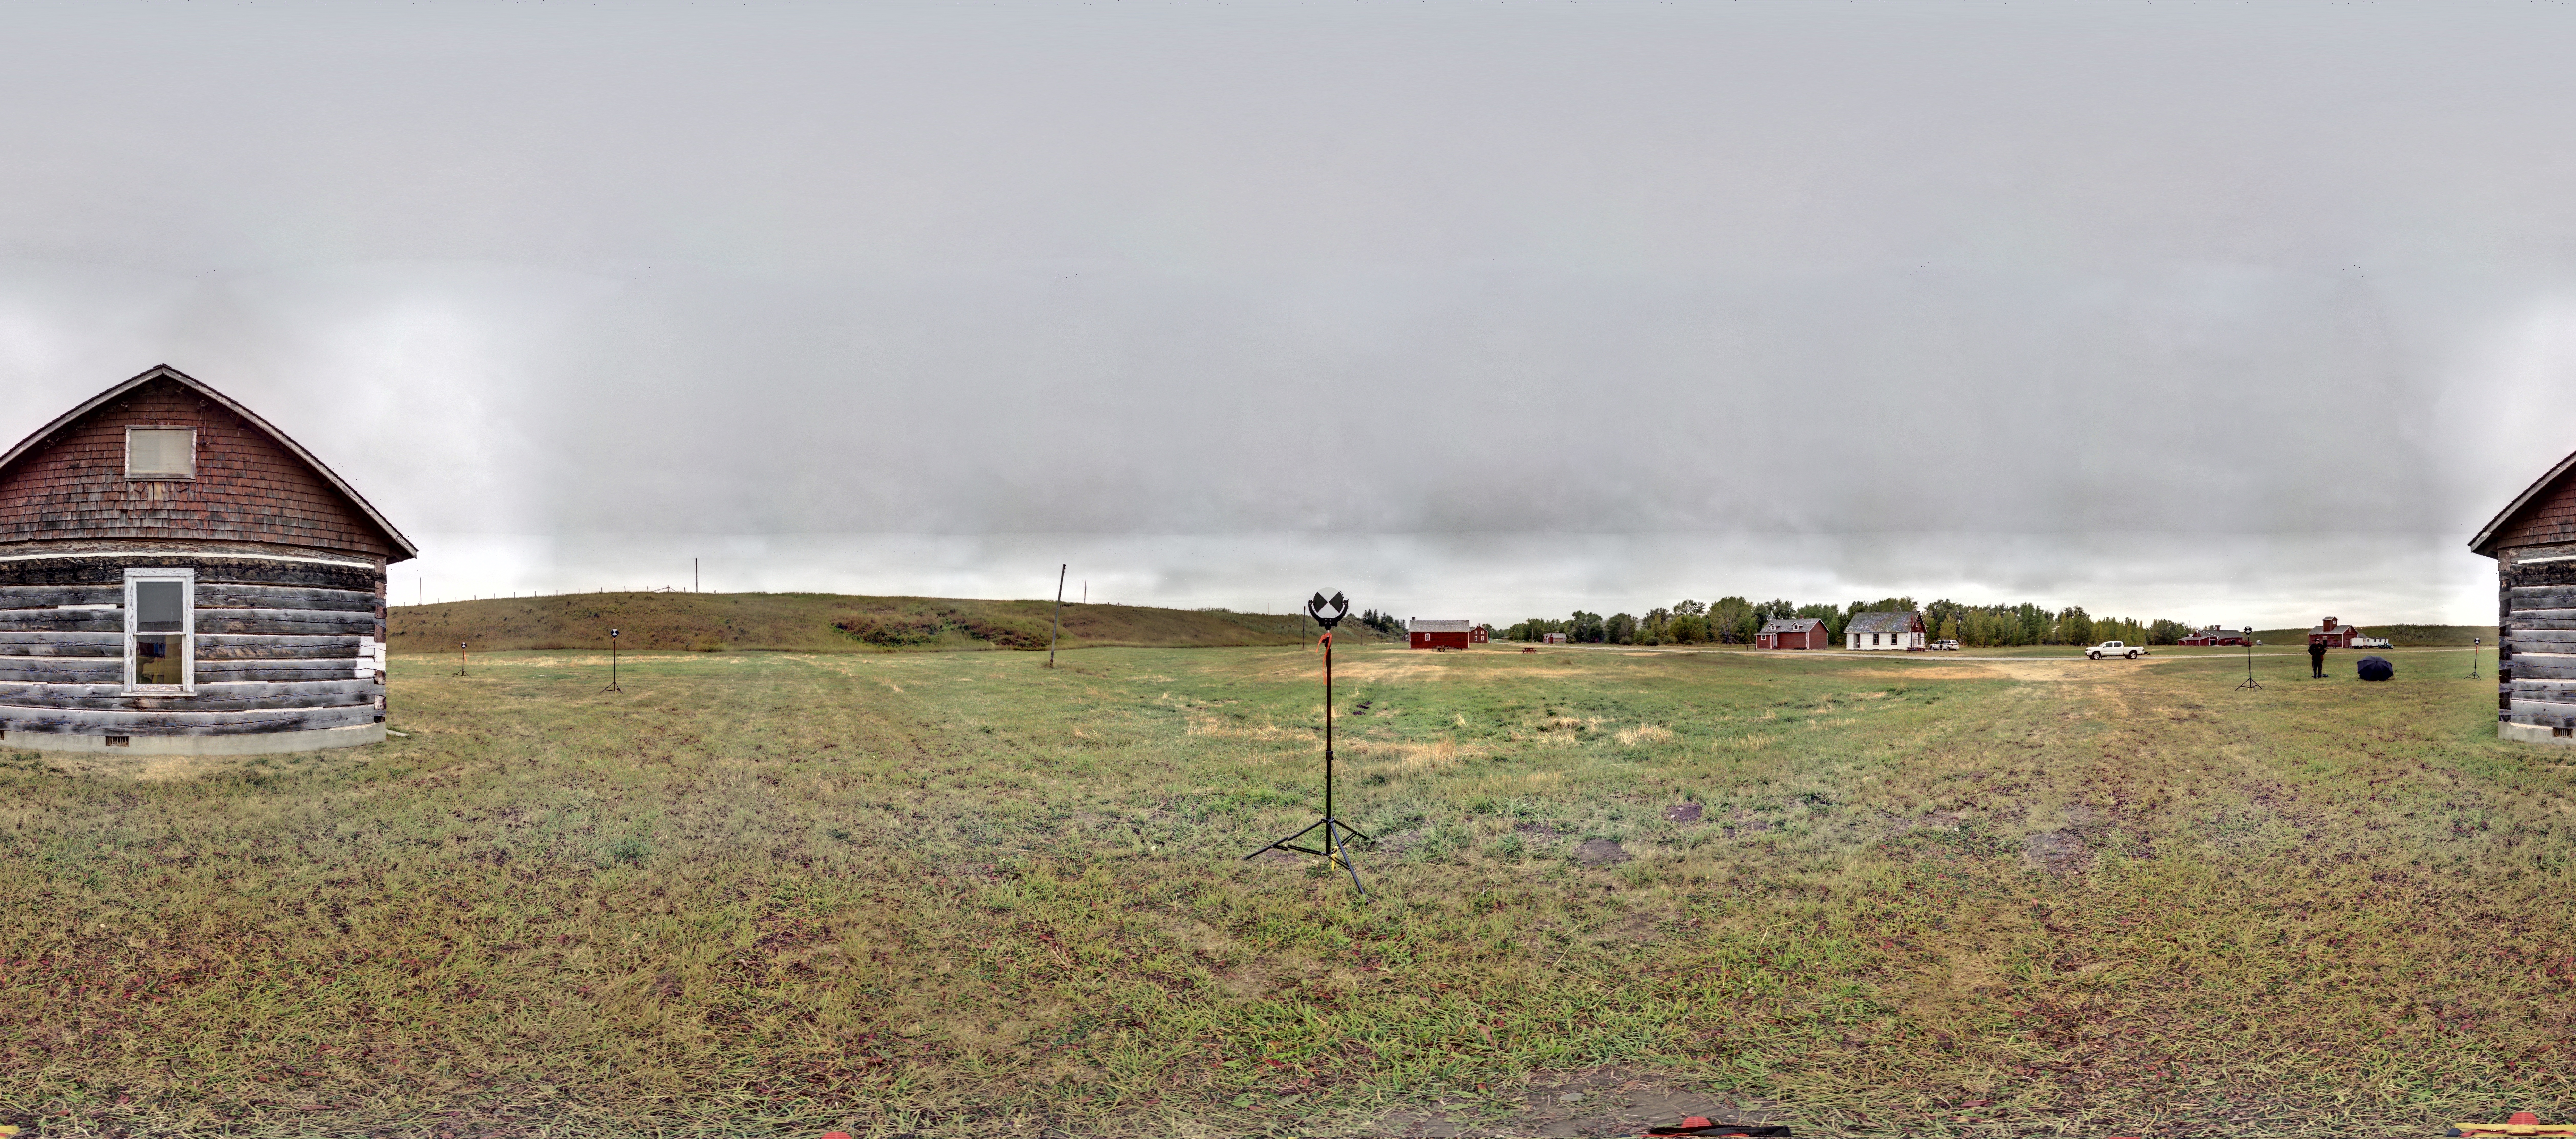 Panoramic image of scanning location 4 of the exterior of the Foreman's House at Bar U Ranch